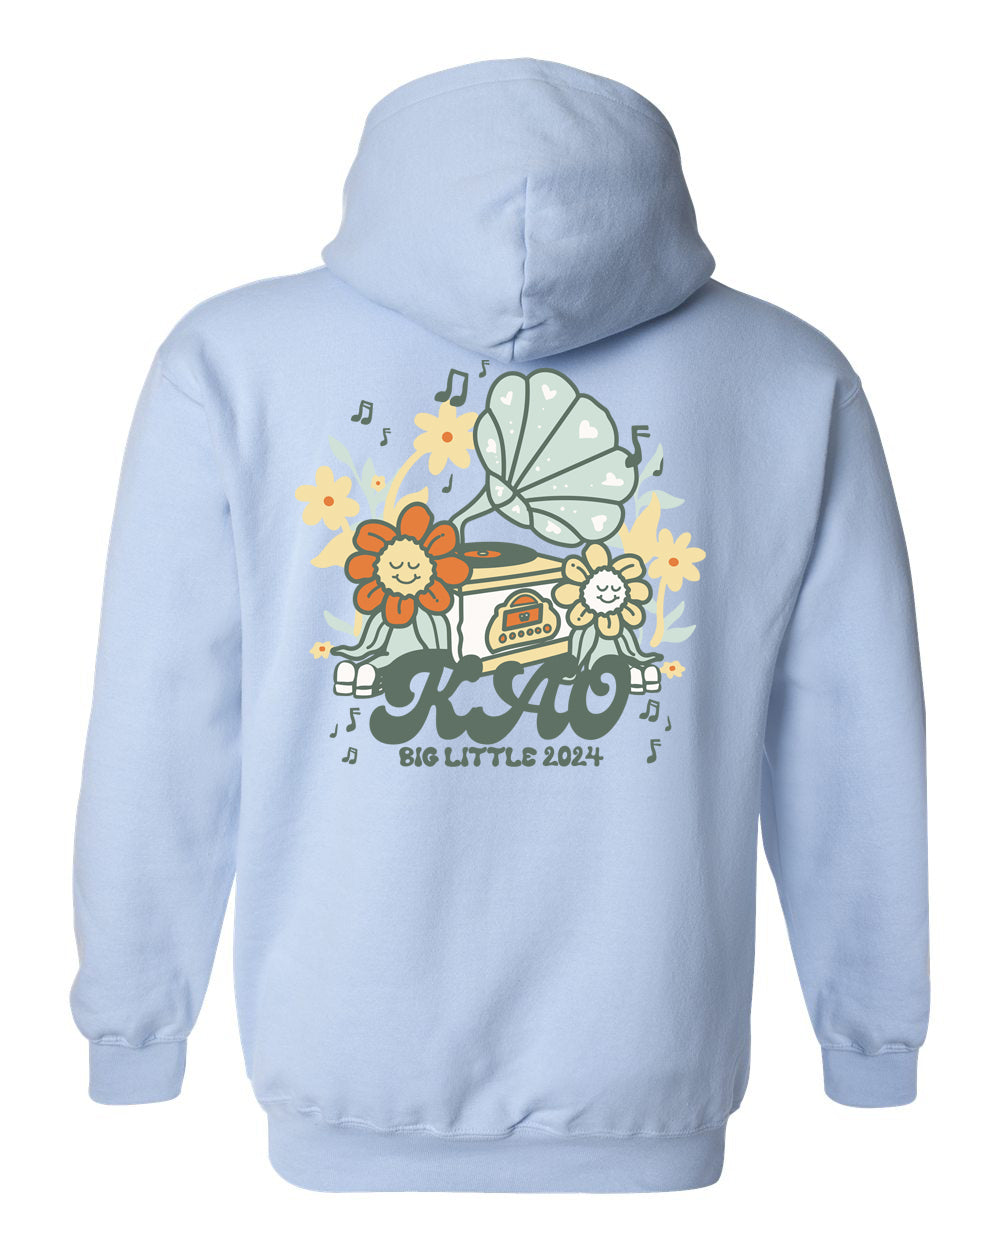 a light blue hoodie with an image of a flower and a radio on it